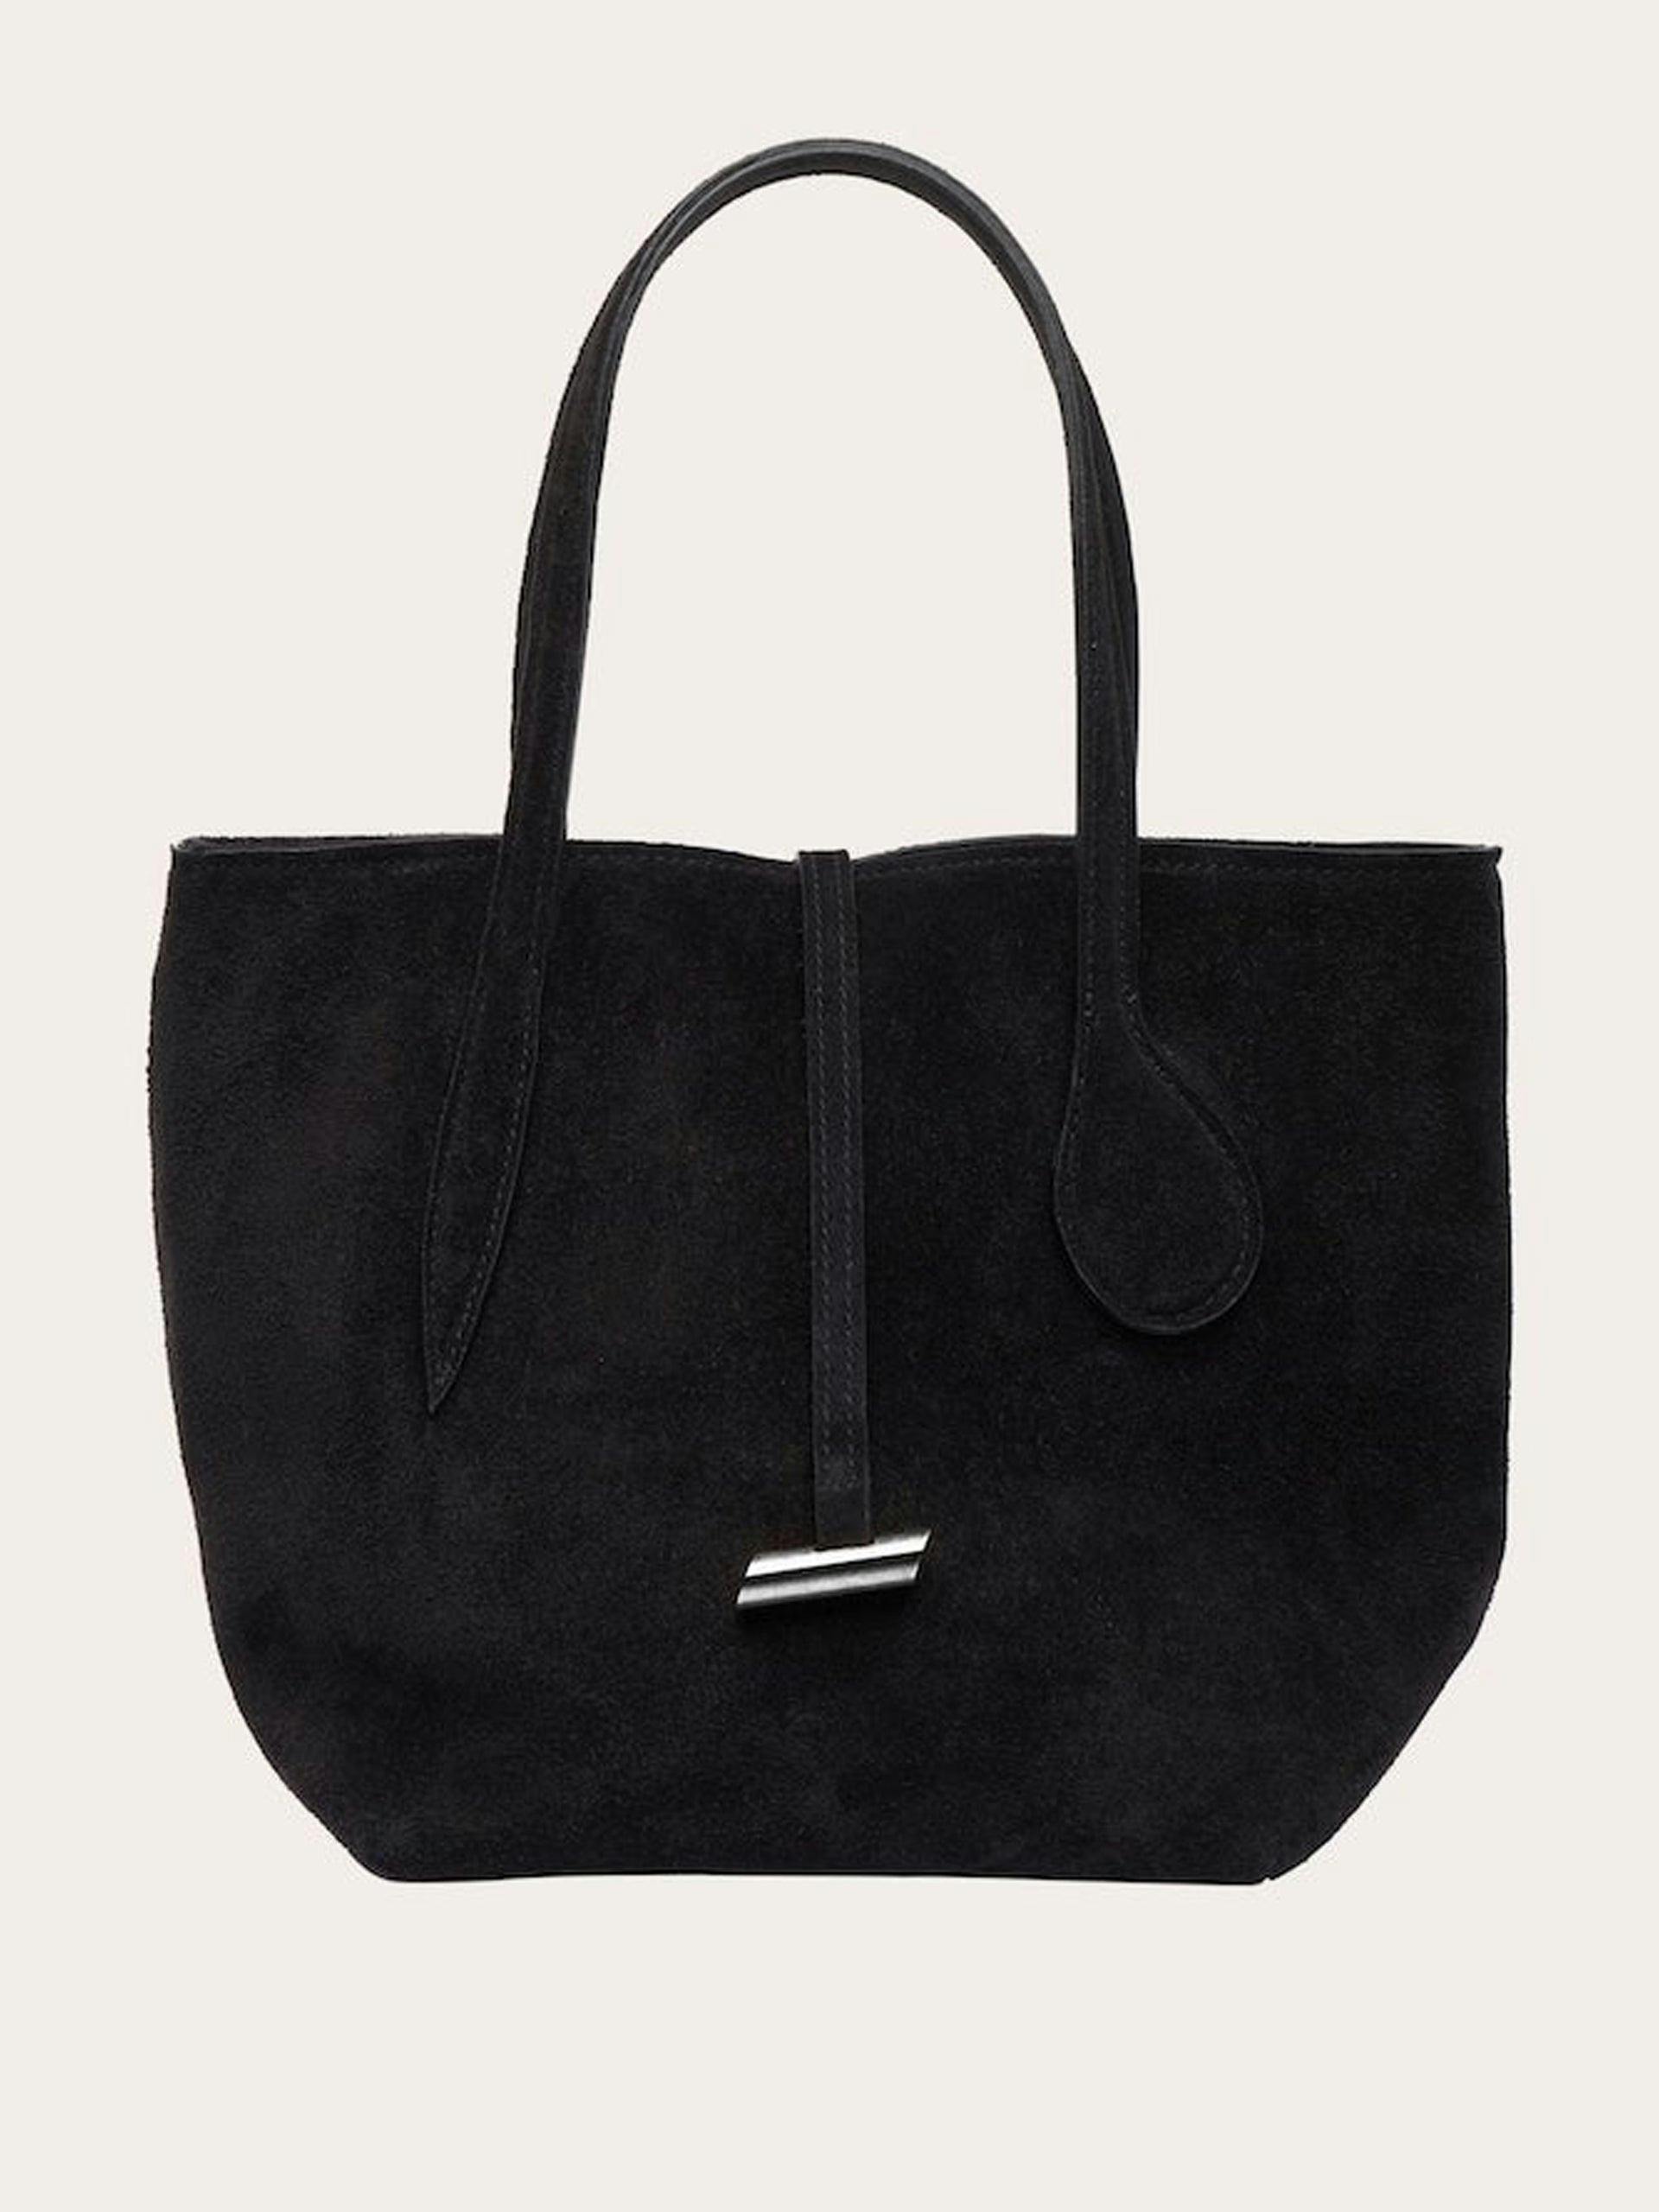 Black suede Sprout tote bag, mini